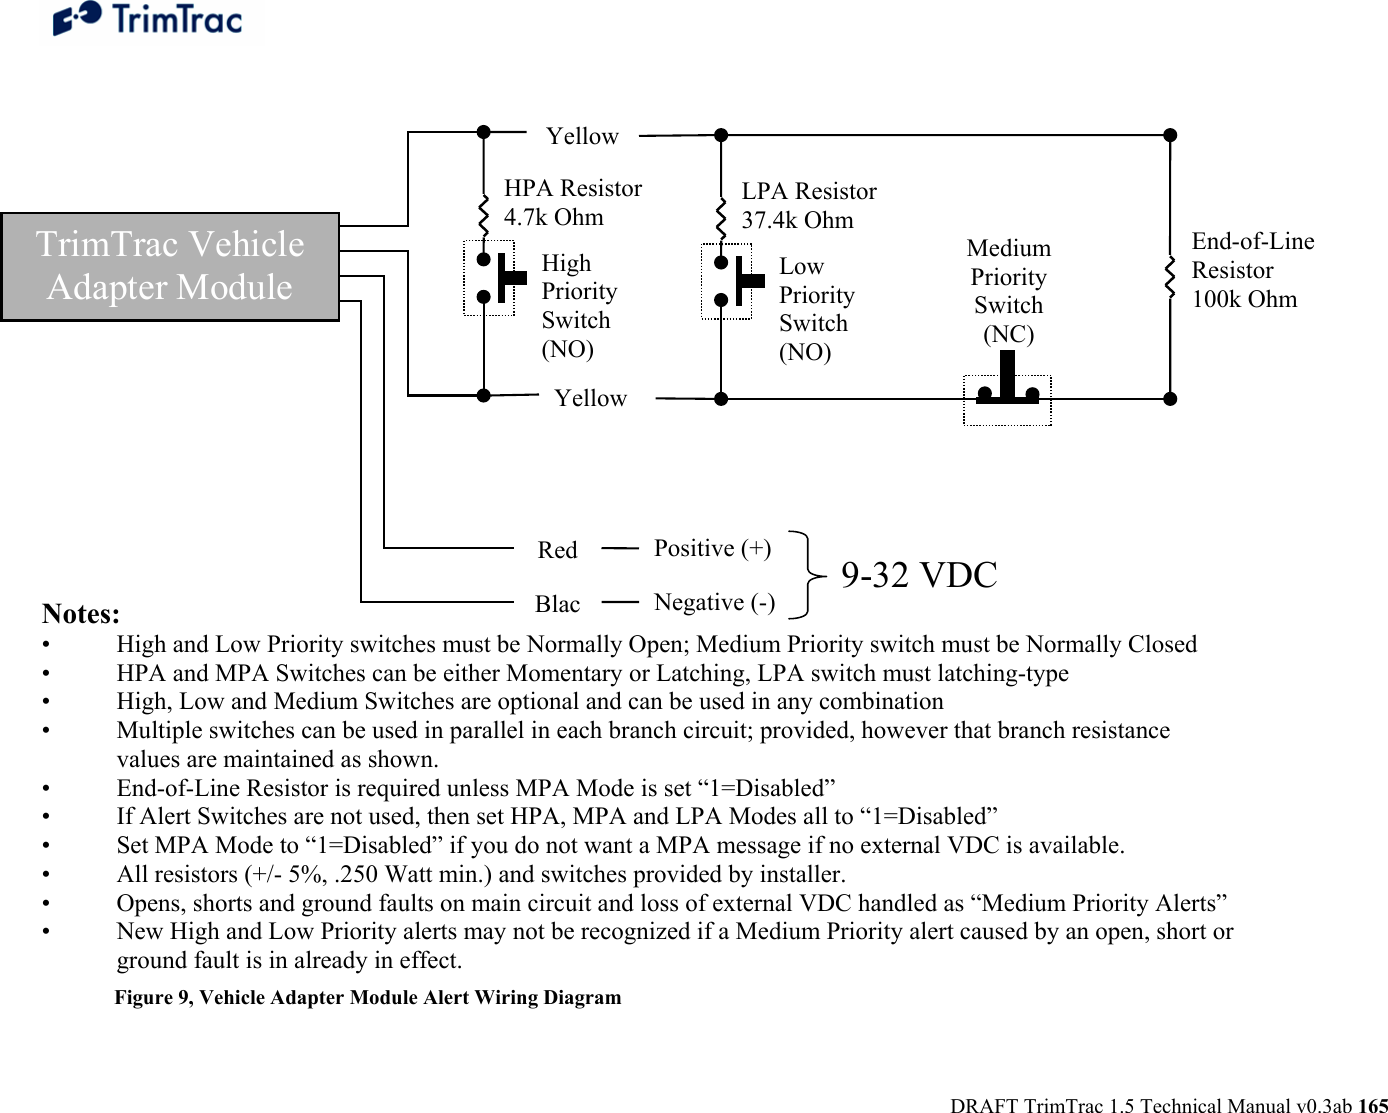  DRAFT TrimTrac 1.5 Technical Manual v0.3ab 165                                 Figure 9, Vehicle Adapter Module Alert Wiring Diagram Notes: • High and Low Priority switches must be Normally Open; Medium Priority switch must be Normally Closed • HPA and MPA Switches can be either Momentary or Latching, LPA switch must latching-type • High, Low and Medium Switches are optional and can be used in any combination • Multiple switches can be used in parallel in each branch circuit; provided, however that branch resistance values are maintained as shown. • End-of-Line Resistor is required unless MPA Mode is set “1=Disabled” • If Alert Switches are not used, then set HPA, MPA and LPA Modes all to “1=Disabled” • Set MPA Mode to “1=Disabled” if you do not want a MPA message if no external VDC is available. • All resistors (+/- 5%, .250 Watt min.) and switches provided by installer. • Opens, shorts and ground faults on main circuit and loss of external VDC handled as “Medium Priority Alerts” • New High and Low Priority alerts may not be recognized if a Medium Priority alert caused by an open, short or ground fault is in already in effect. TrimTrac Vehicle Adapter Module 9-32 VDCPositive (+) Negative (-) RedBlacMedium Priority Switch (NC) End-of-Line Resistor 100k Ohm Low Priority  Switch (NO) LPA Resistor  37.4k Ohm Yellow High Priority  Switch (NO) HPA Resistor 4.7k Ohm Yellow 